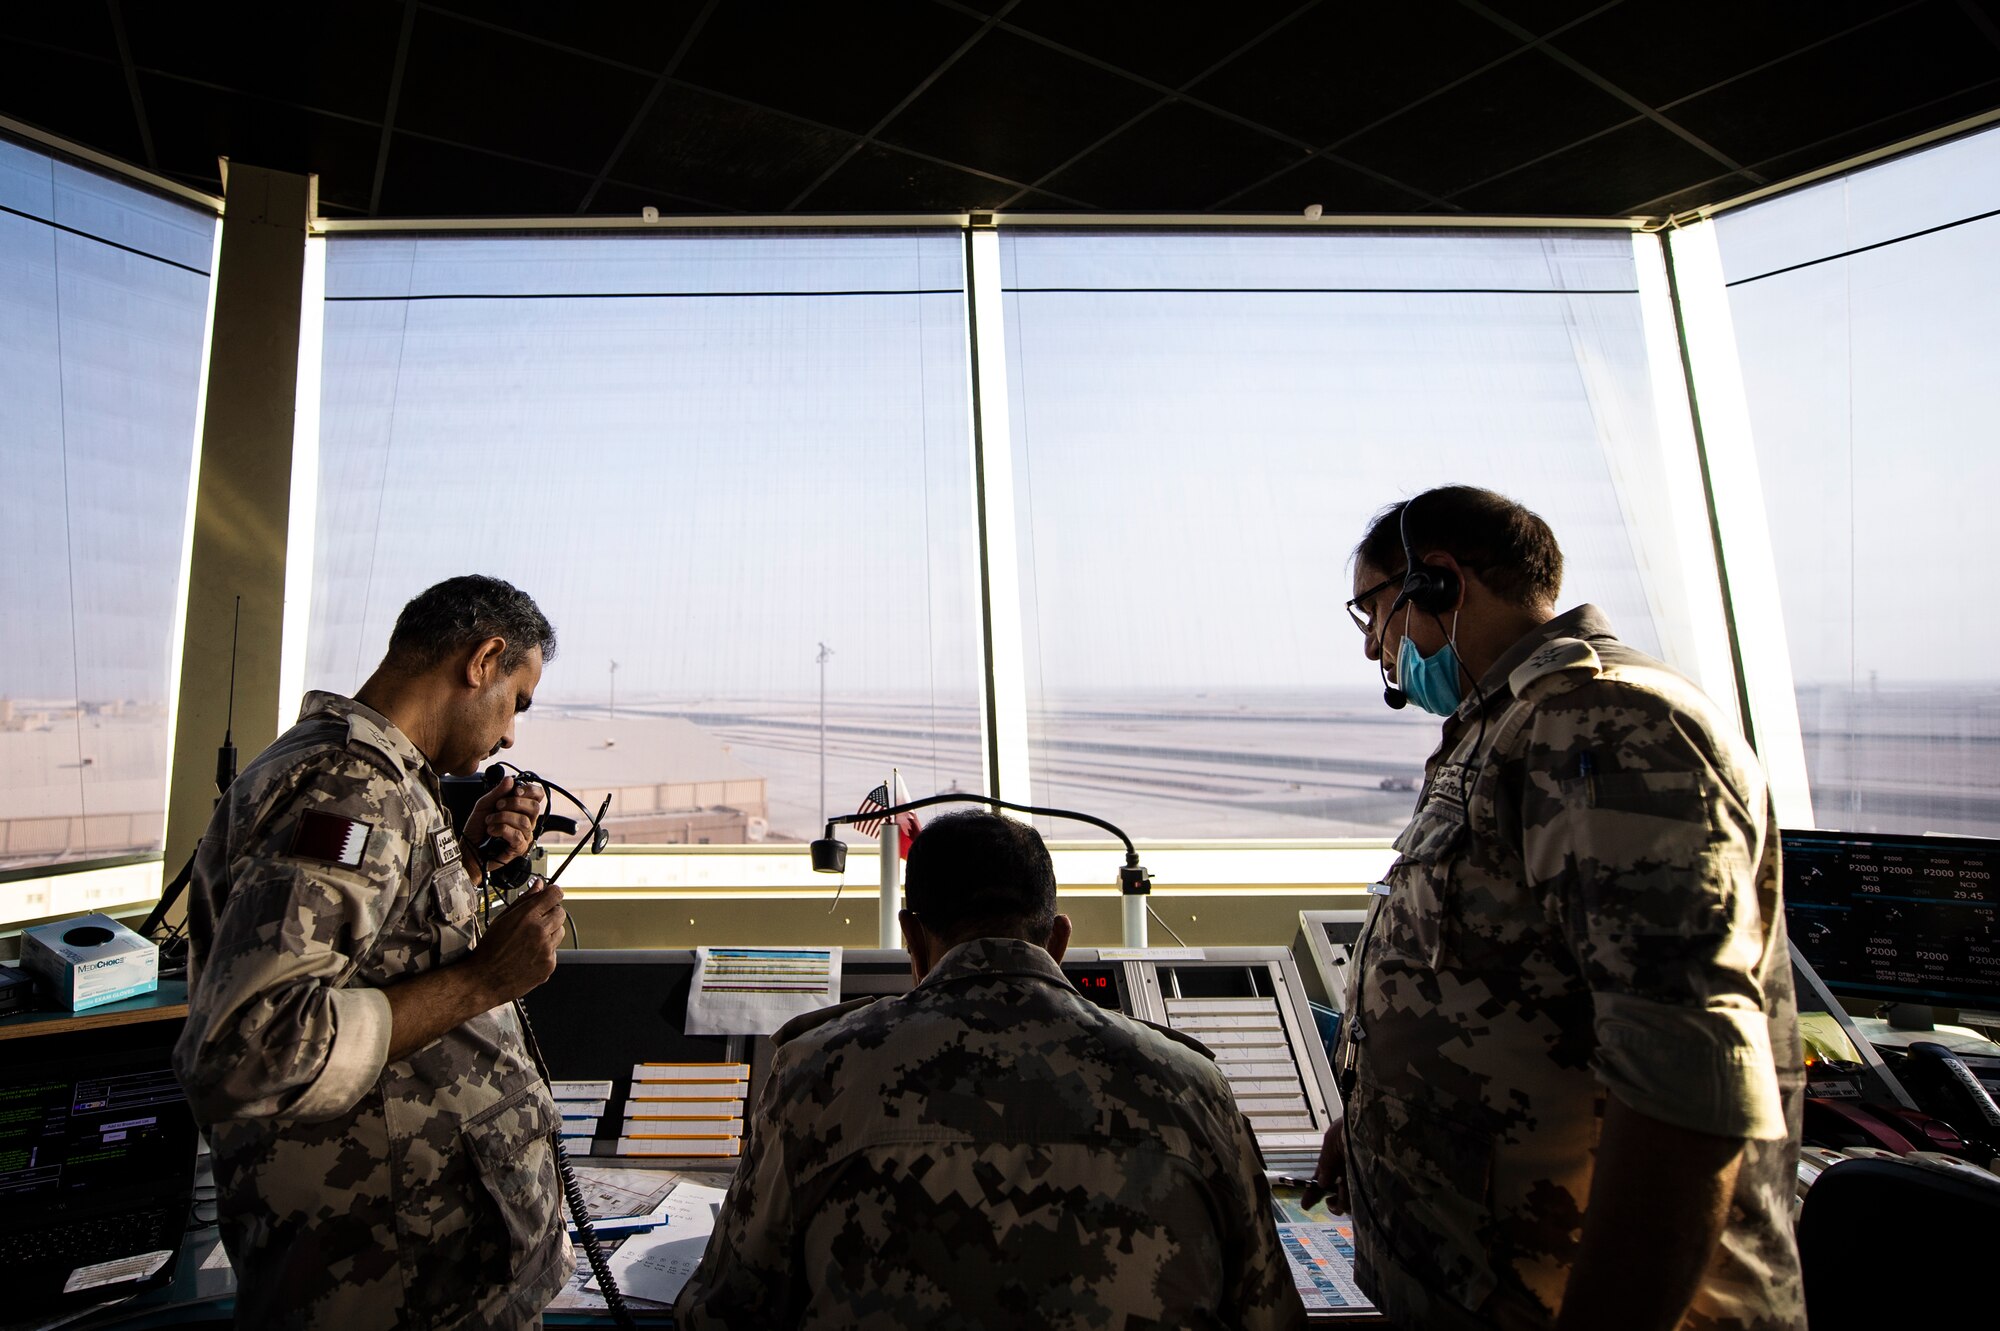 Members of the Qatar Emiri Air Force (QEAF) air traffic control tower work together to direct aircraft at Al Udeid Air Base, Qatar, Aug. 24, 2020. A letter of agreement was recently implemented between the U.S., QEAF and Qatar Civil Aviation Authority to better work together to ensure safe air space operations. (U.S. Air Force photo by Master Sgt. Larry E. Reid Jr.)